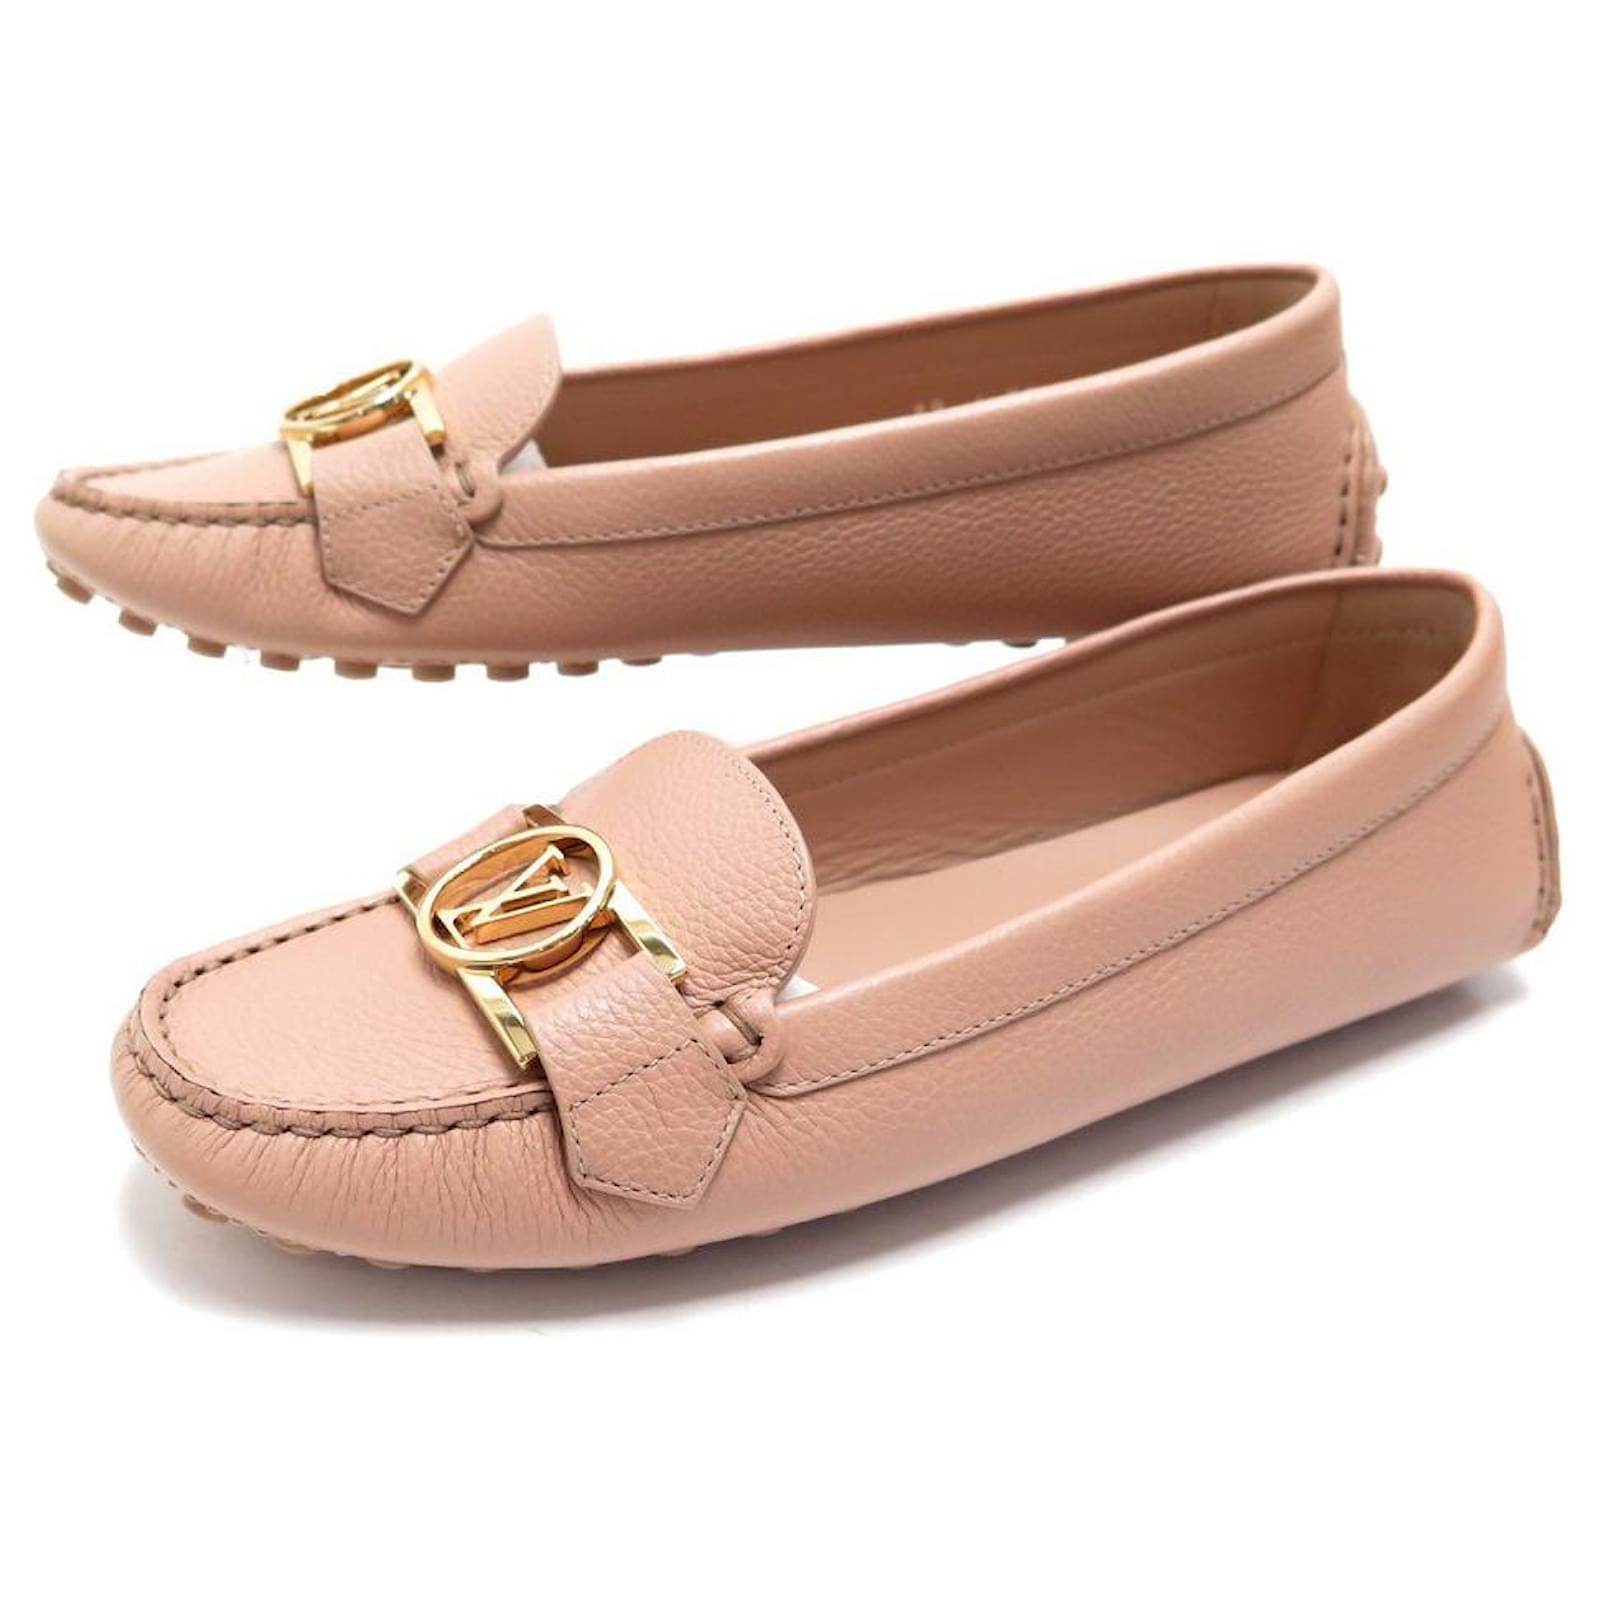 Louis Vuitton Lv woman shoes leather loafers  Louis vuitton loafers, Louis  vuitton shoes, Leather shoes woman